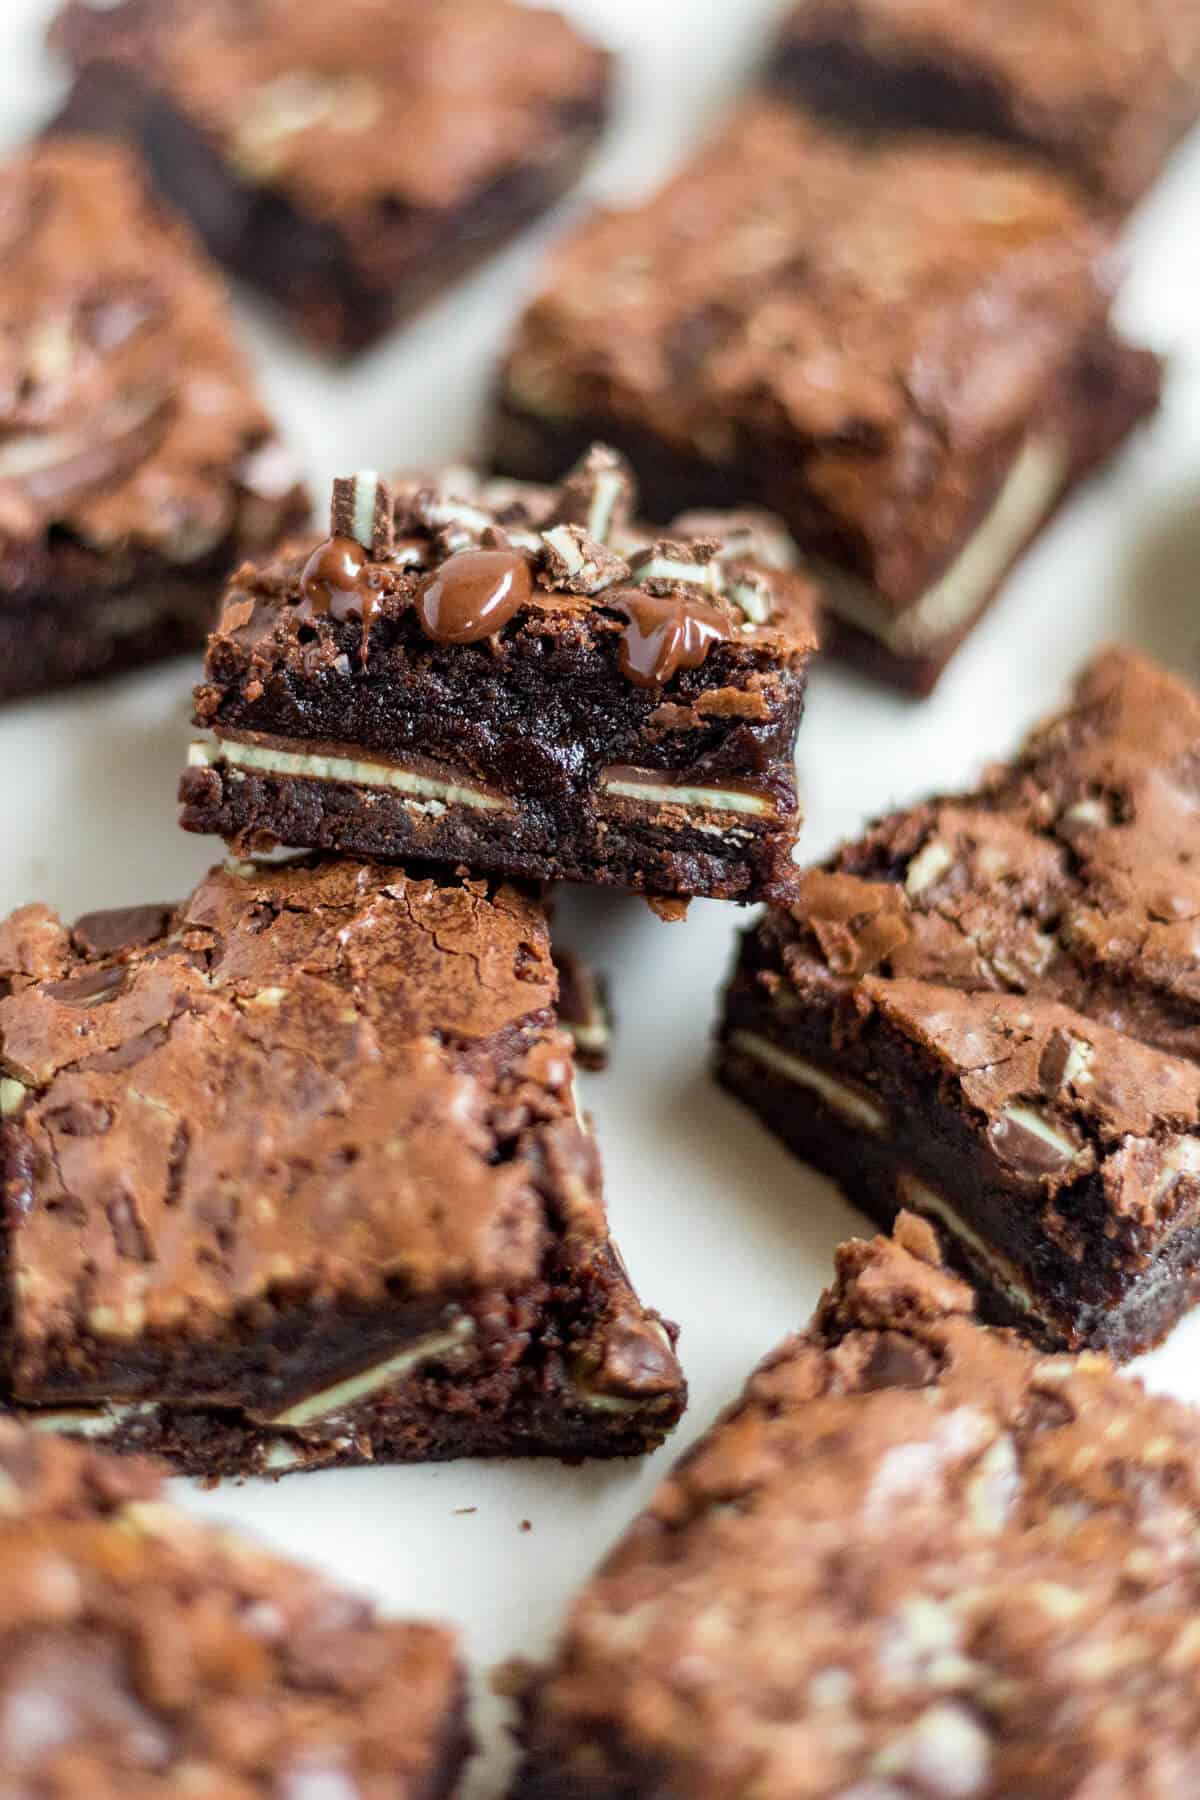 These Andes mint brownies are thick and fudgy! They're homemade brownies with a layer of Andes mints right in the middle. Sprinkle with more chopped mints and drizzle with melted chocolate and serve these at your next holiday party.